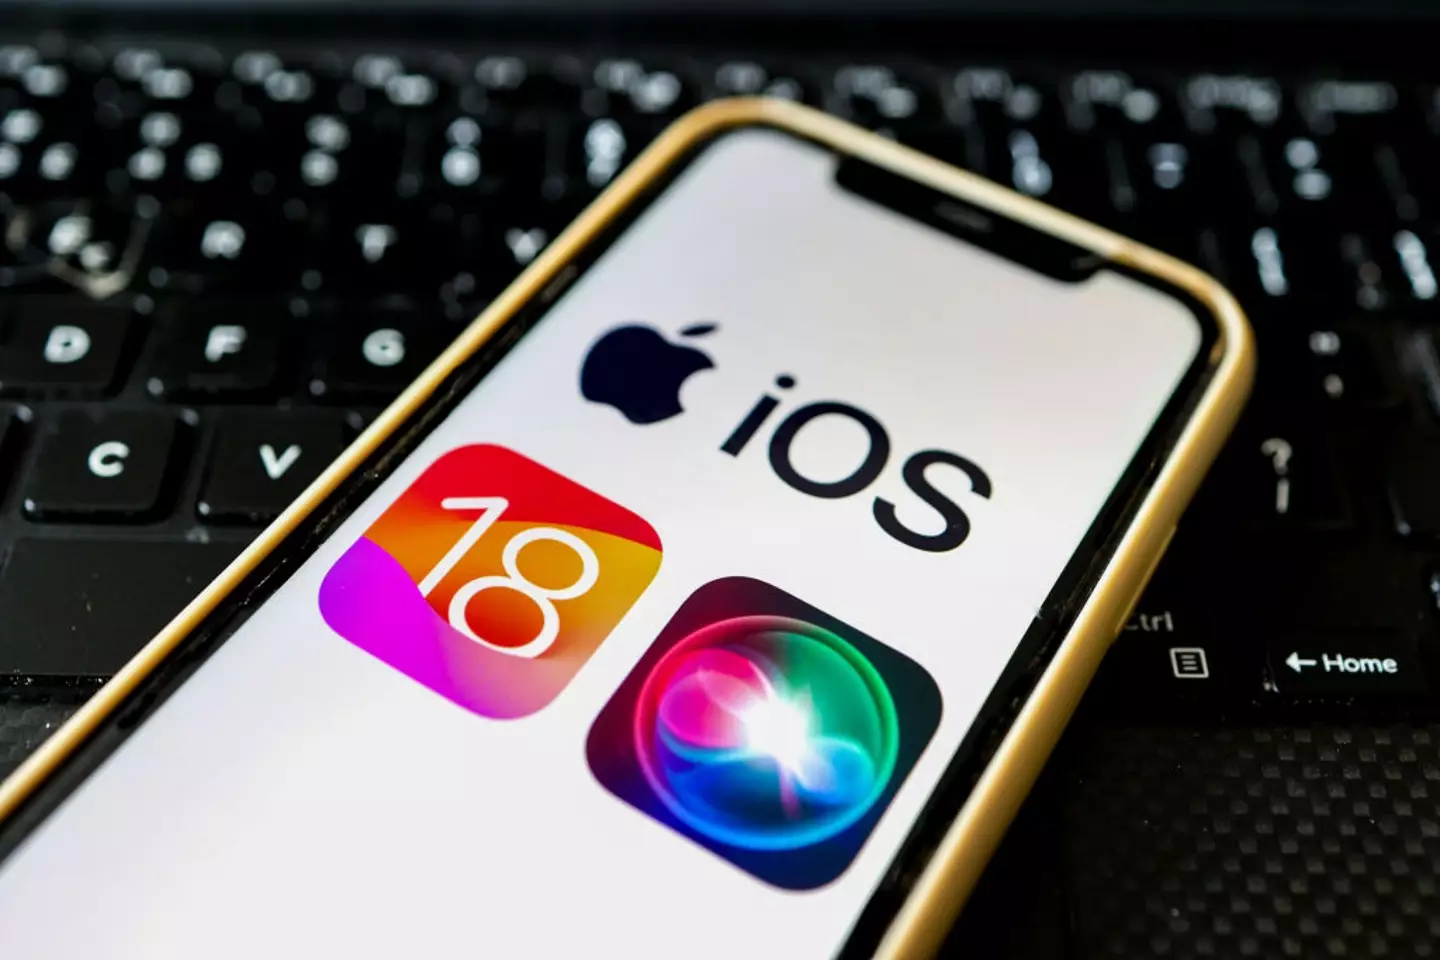 There are a lot of new features coming with iOS 18 (Filip Radwanski/SOPA Images/LightRocket via Getty Images)